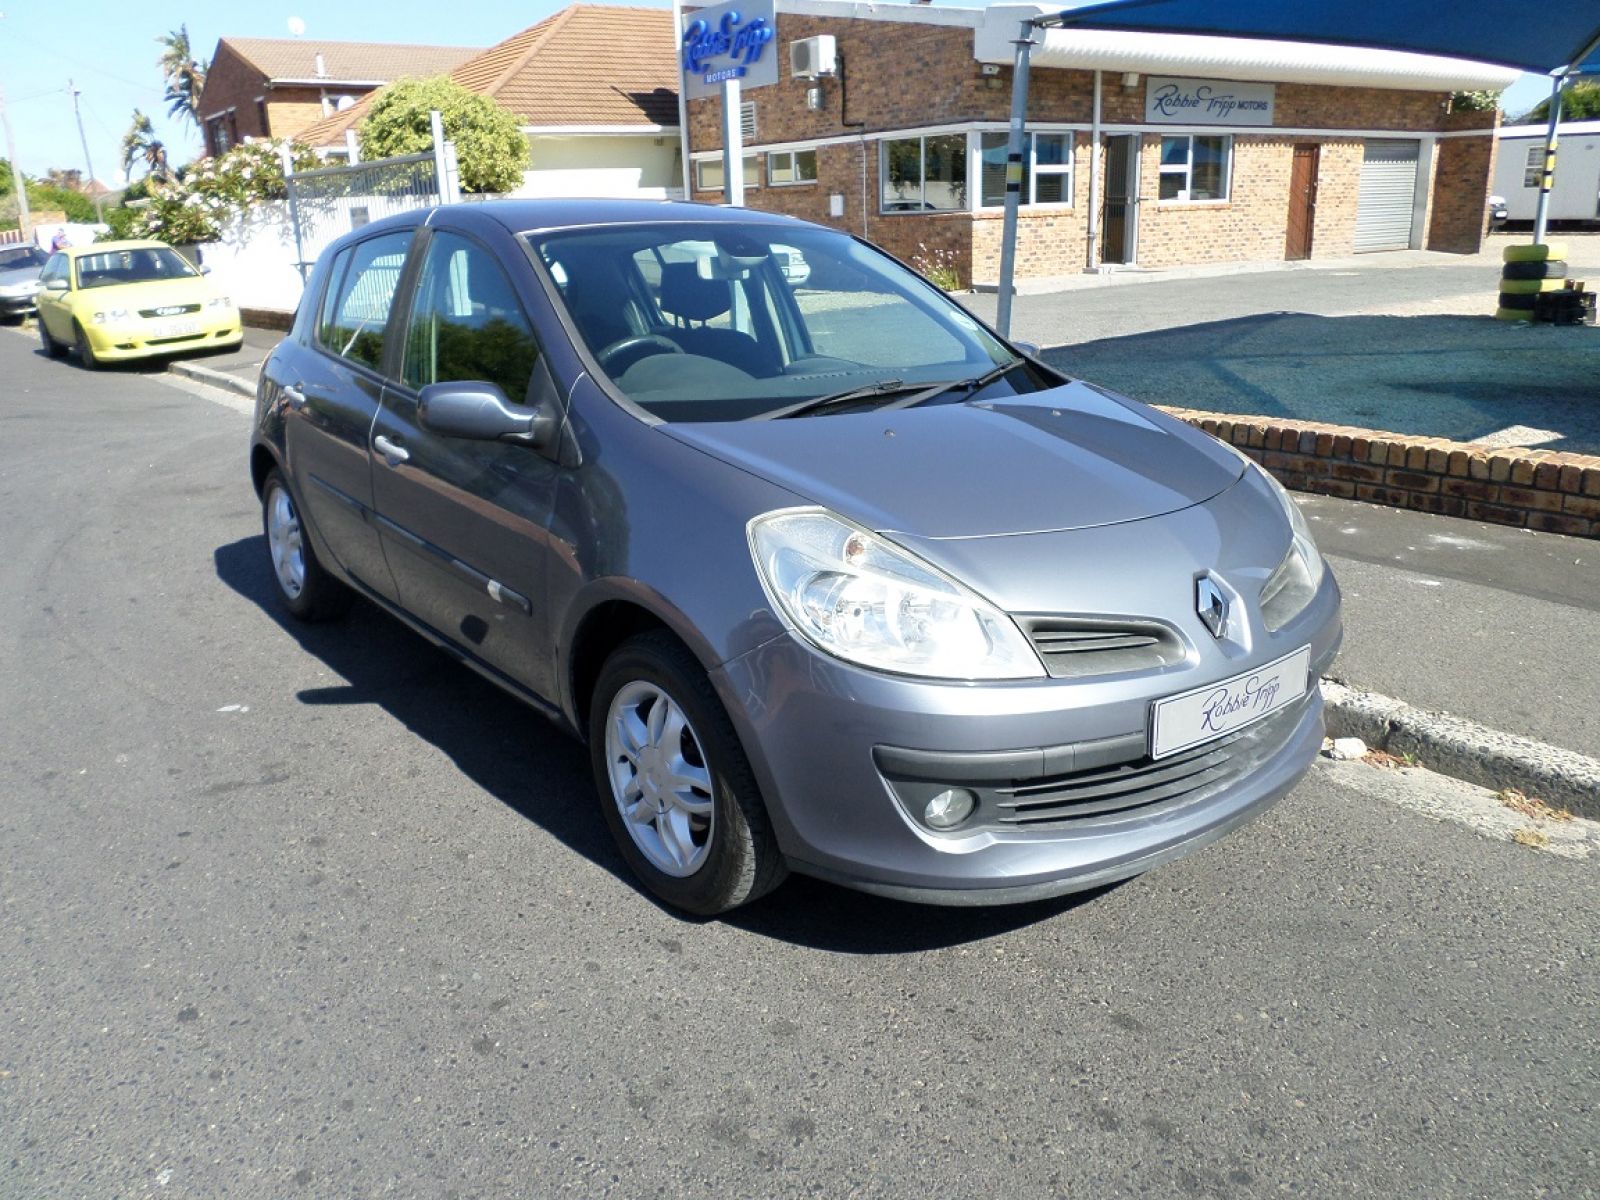 CLIO 3 CLIO III 1.6 DYNAMIQUE 5Dr Specifications